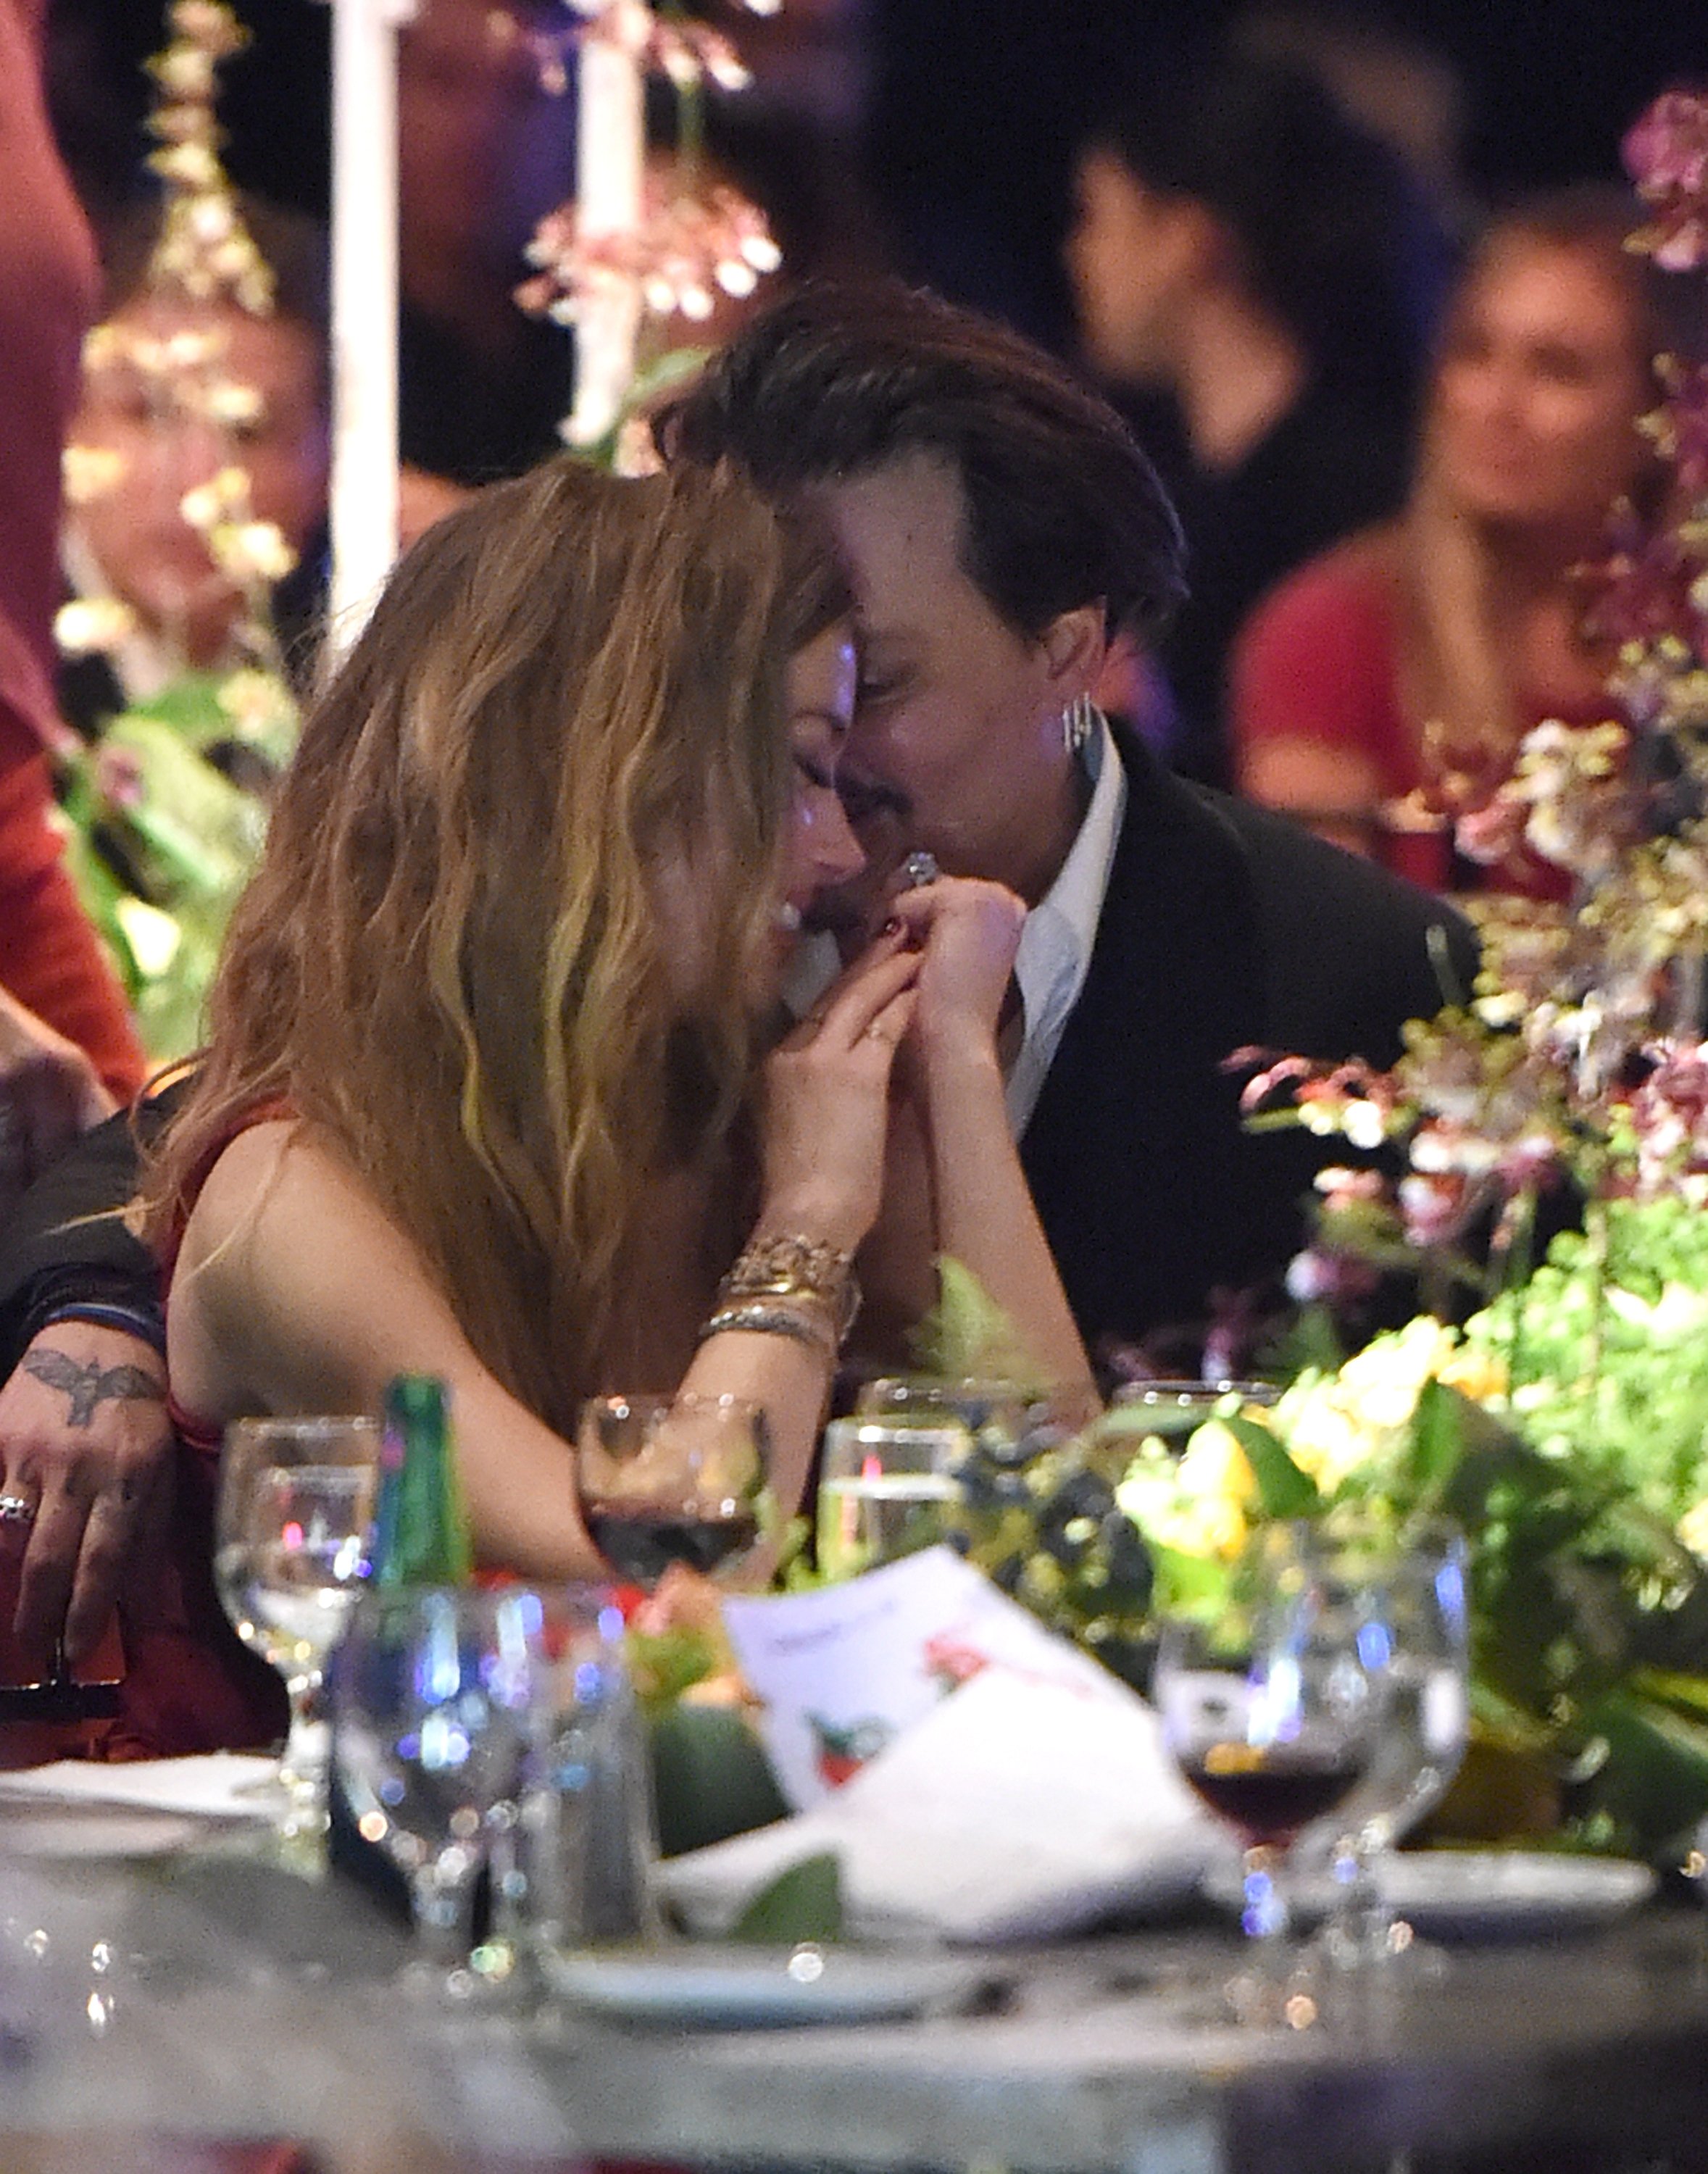 Amber Heard and Johnny Depp during The Art of Elysium 2016 Heaven Gala at 3LABS on January 9, 2016 in Culver City, California. / Source: Getty Images